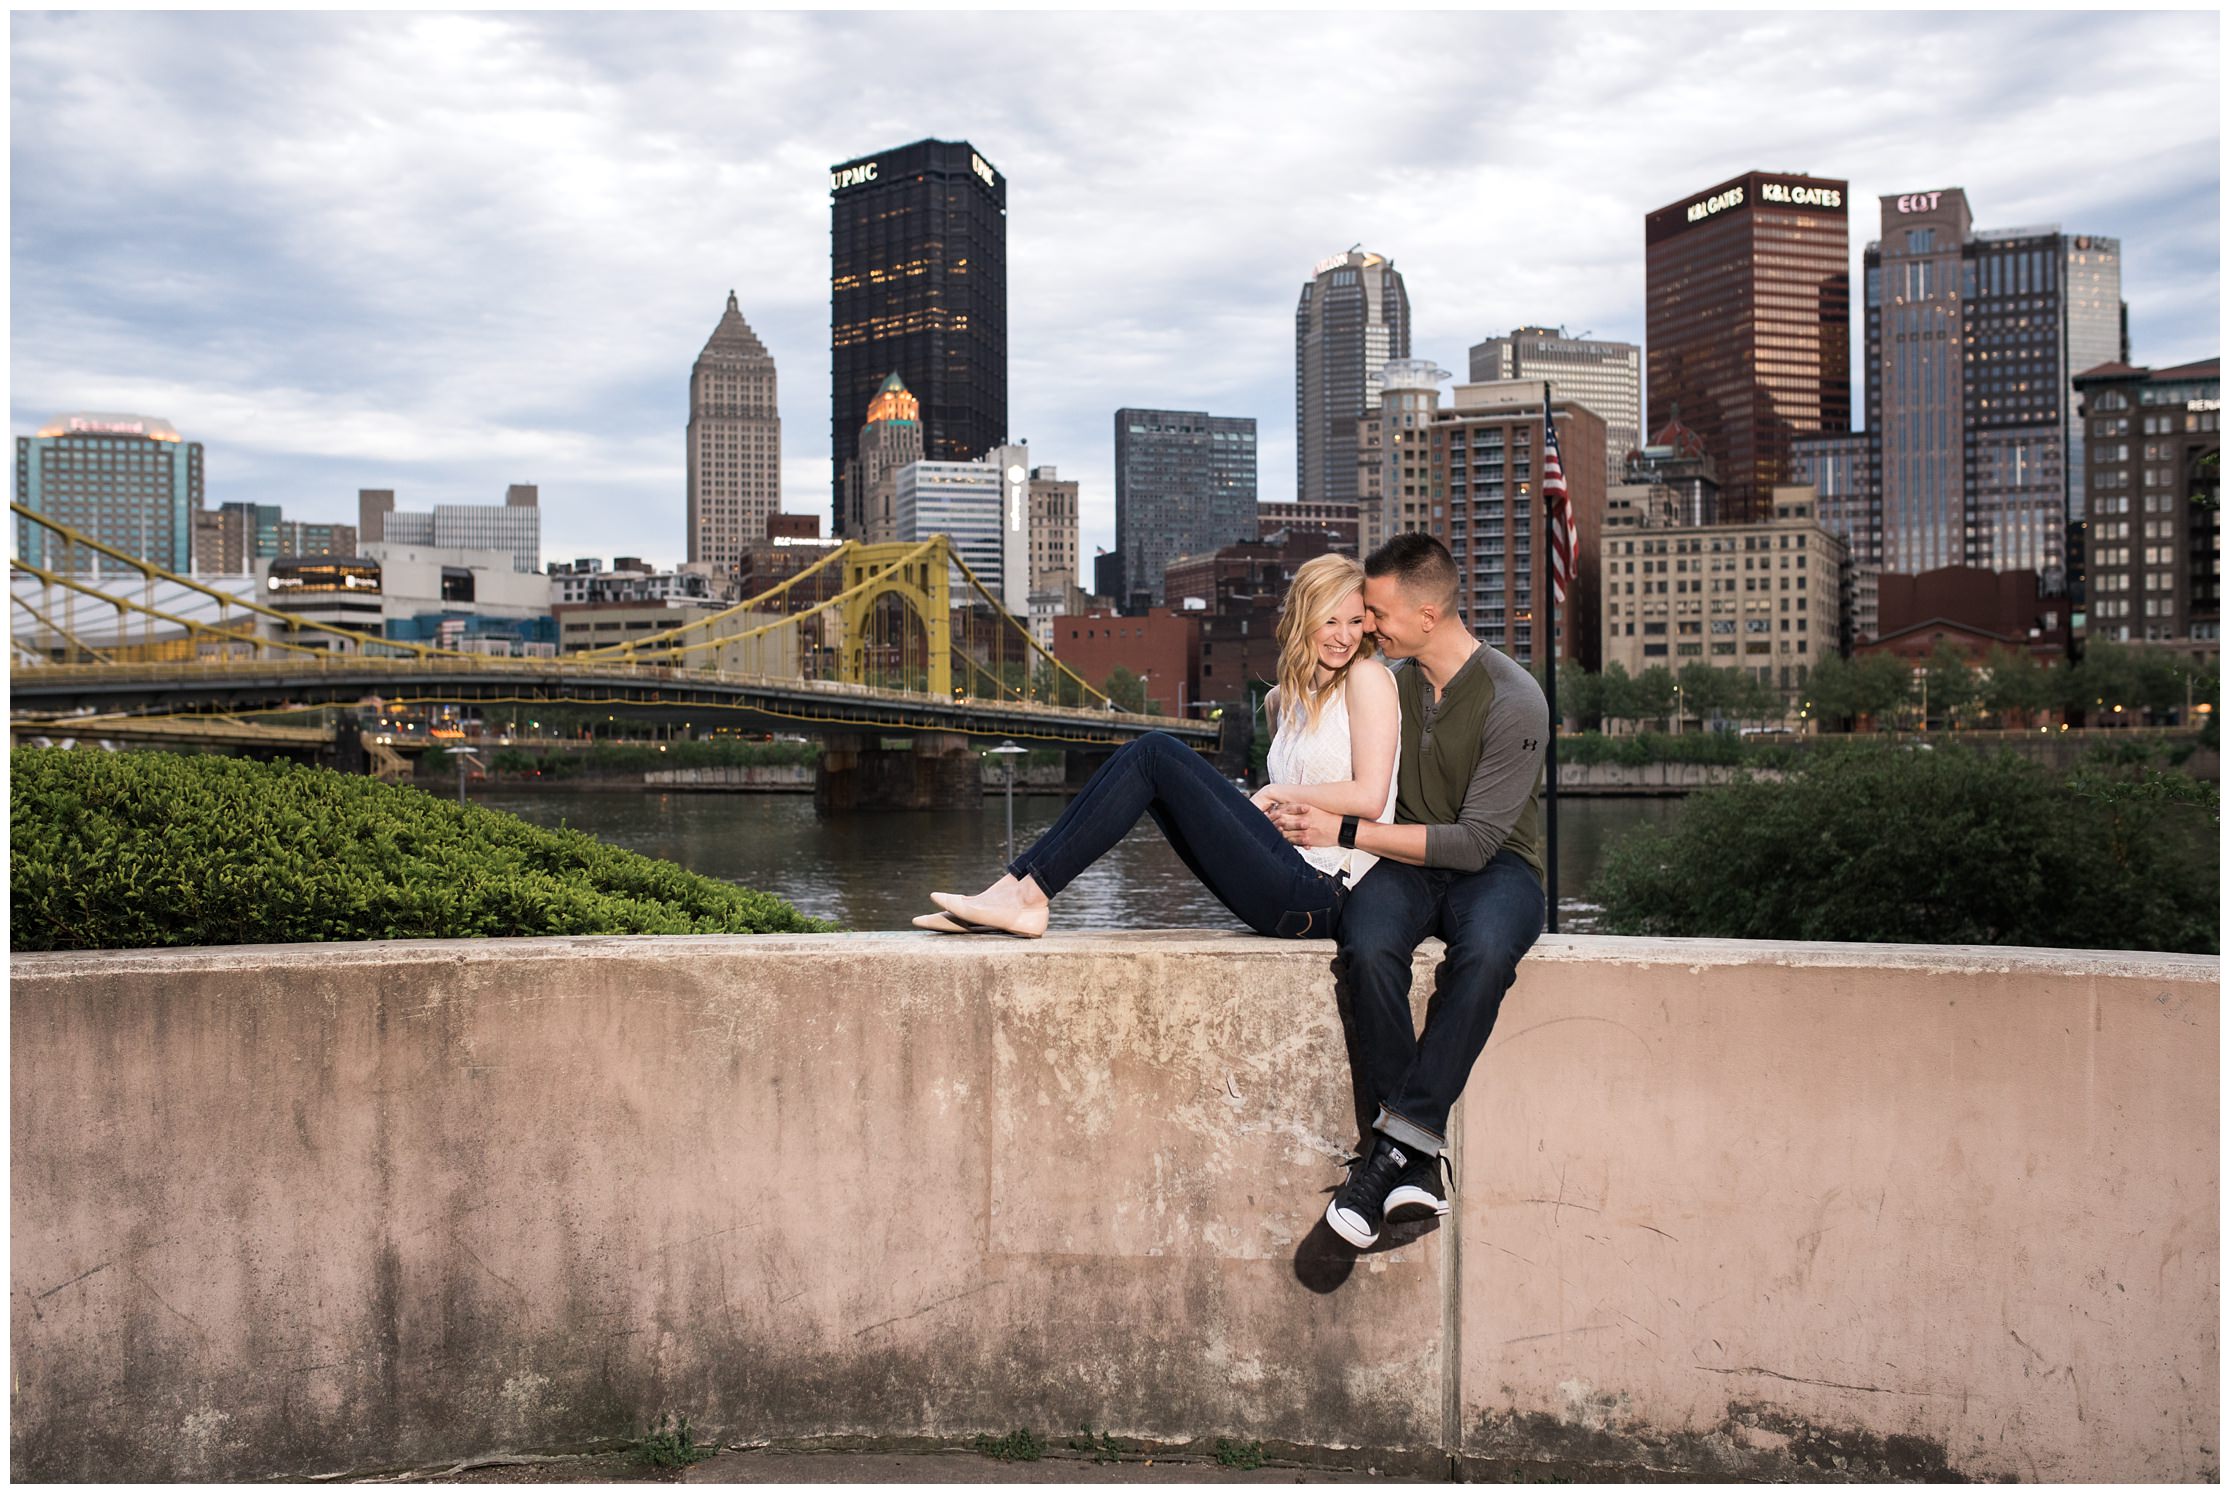 pittsburgh north shore, pittsburgh north shore engagement session, pittsburgh engagement photographer, pittsburgh engagement photography, pittsburgh engagement, pittsburgh wedding photographer, pittsburgh wedding photography, pittsburgh wedding, pittsburgh north shore, pittsburgh skyline, pittsburgh couple, engagement photo, engagement photography,